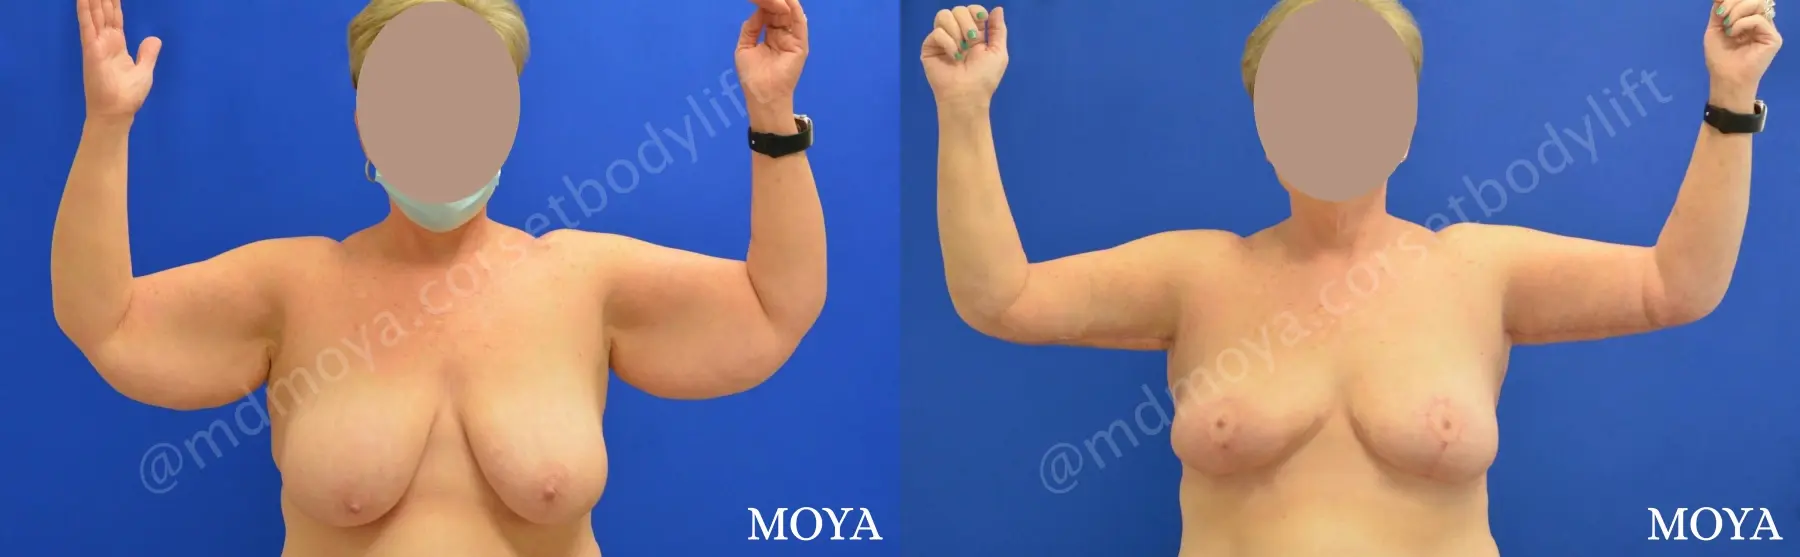 Upper Body Lift without Implants - Before and After  